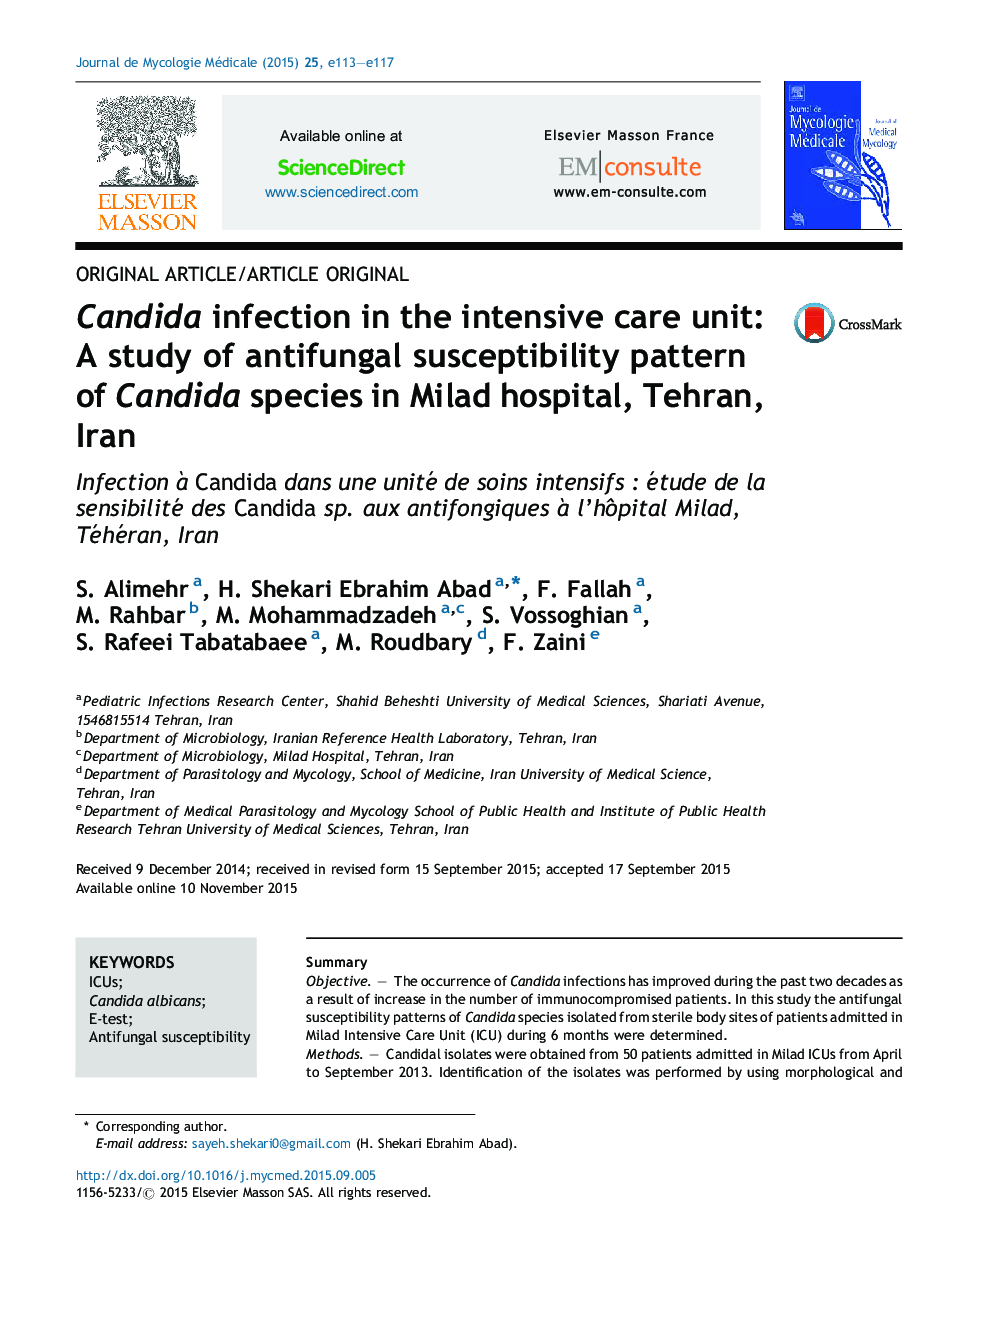 Candida infection in the intensive care unit: A study of antifungal susceptibility pattern of Candida species in Milad hospital, Tehran, Iran